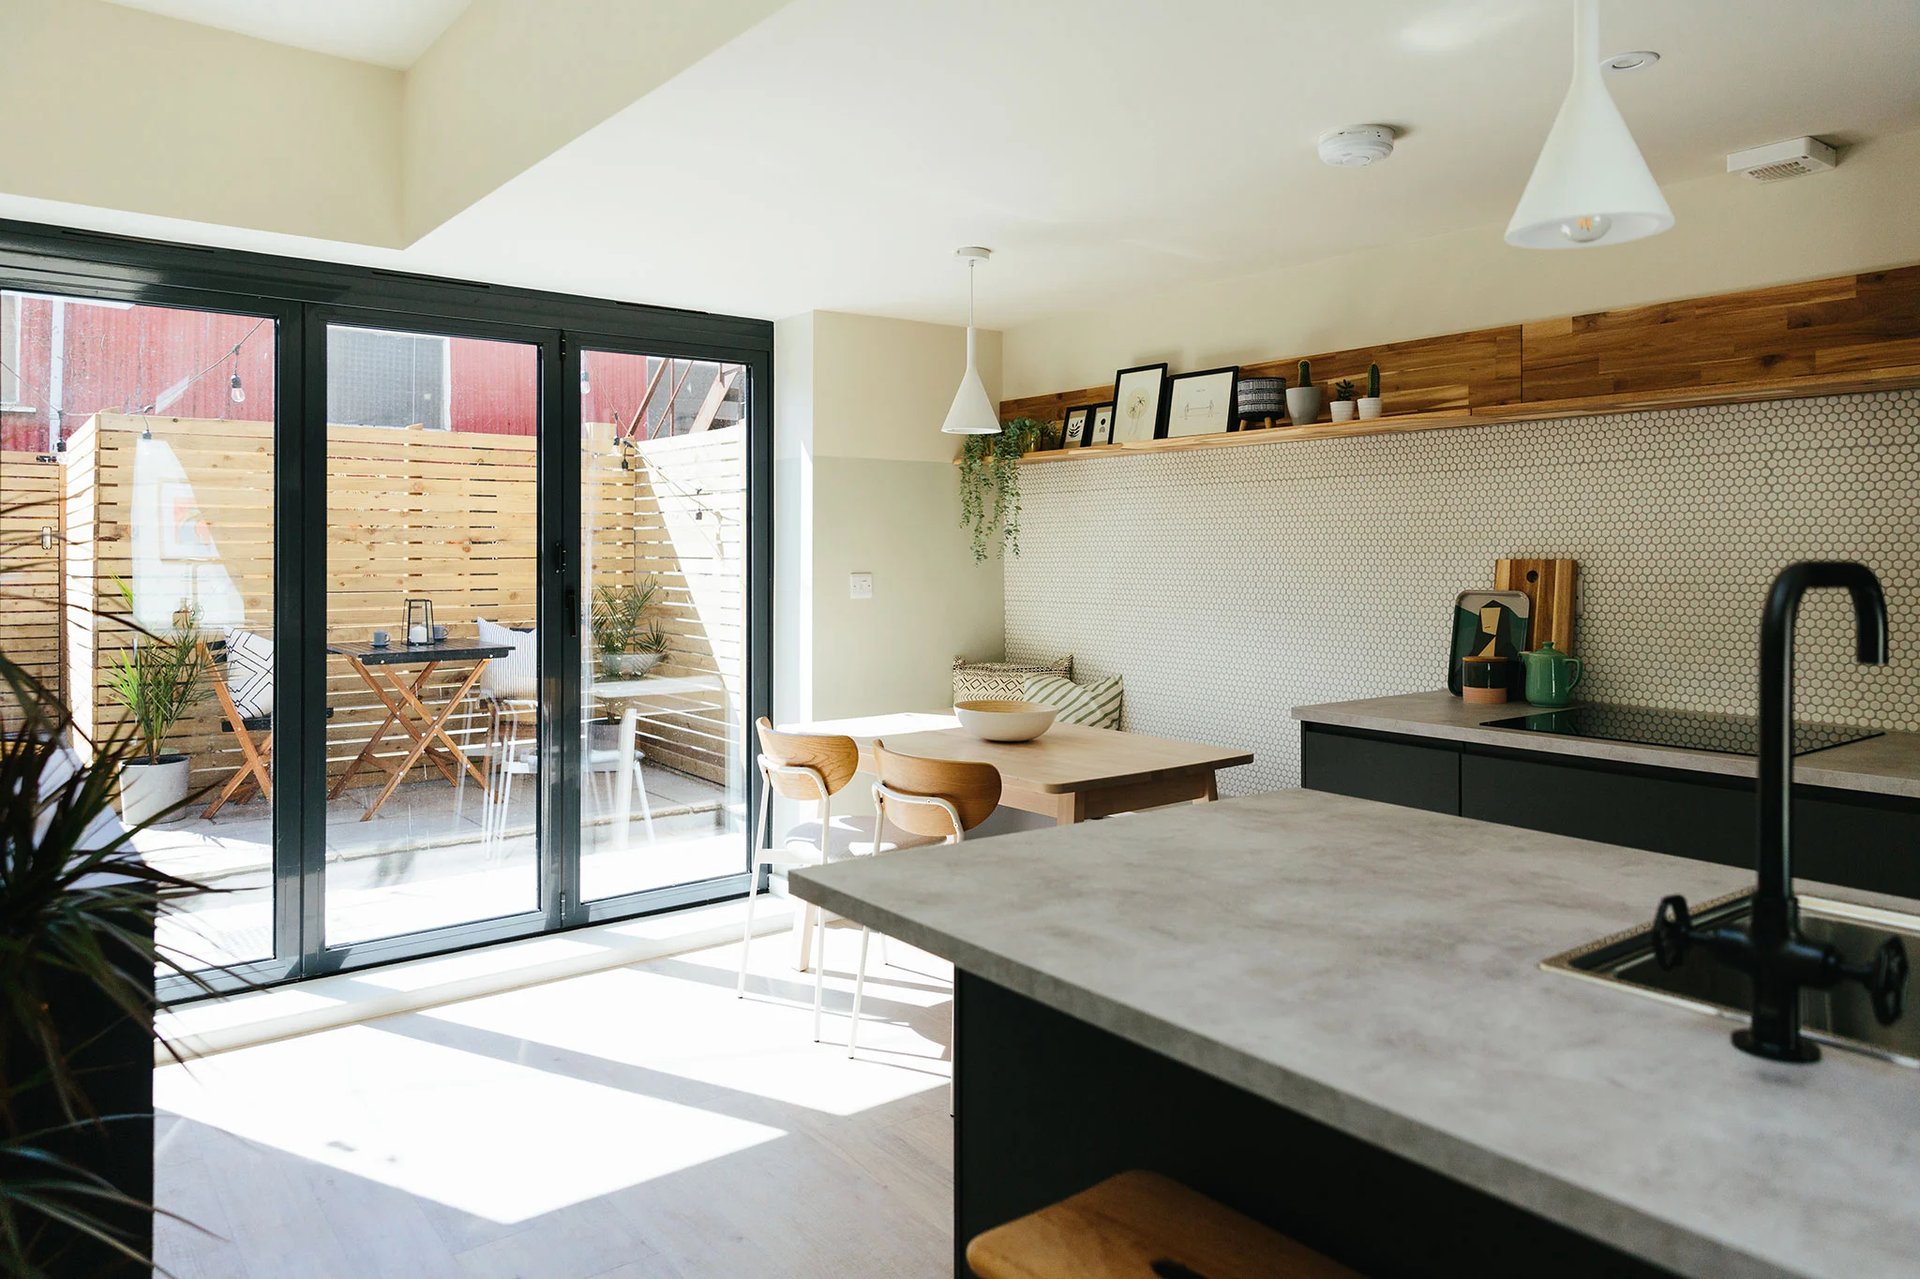 Bright and open kitchen with bifold doors